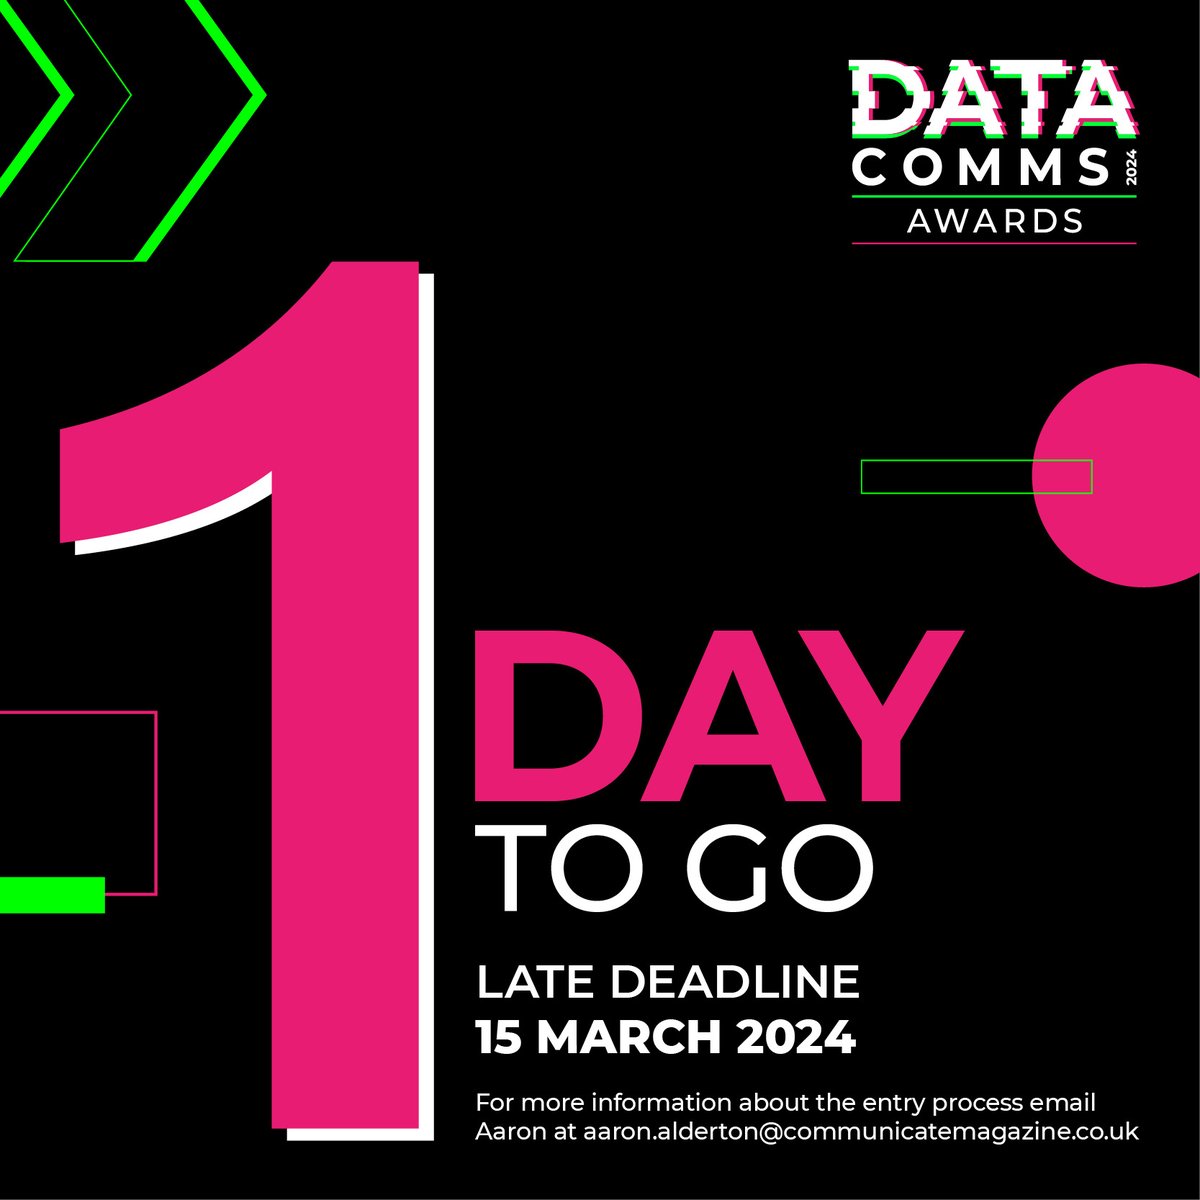 One day to go until the extended deadline for the DataComms Awards 2024! ⏳

This is your last chance to enter the DataComms Awards! 🌟
Enter now 👉 bit.ly/3RY4Yxb

For questions about the awards, please email Aaron at: aaron.alderton@communicatemagazine.co.uk
#DataComms